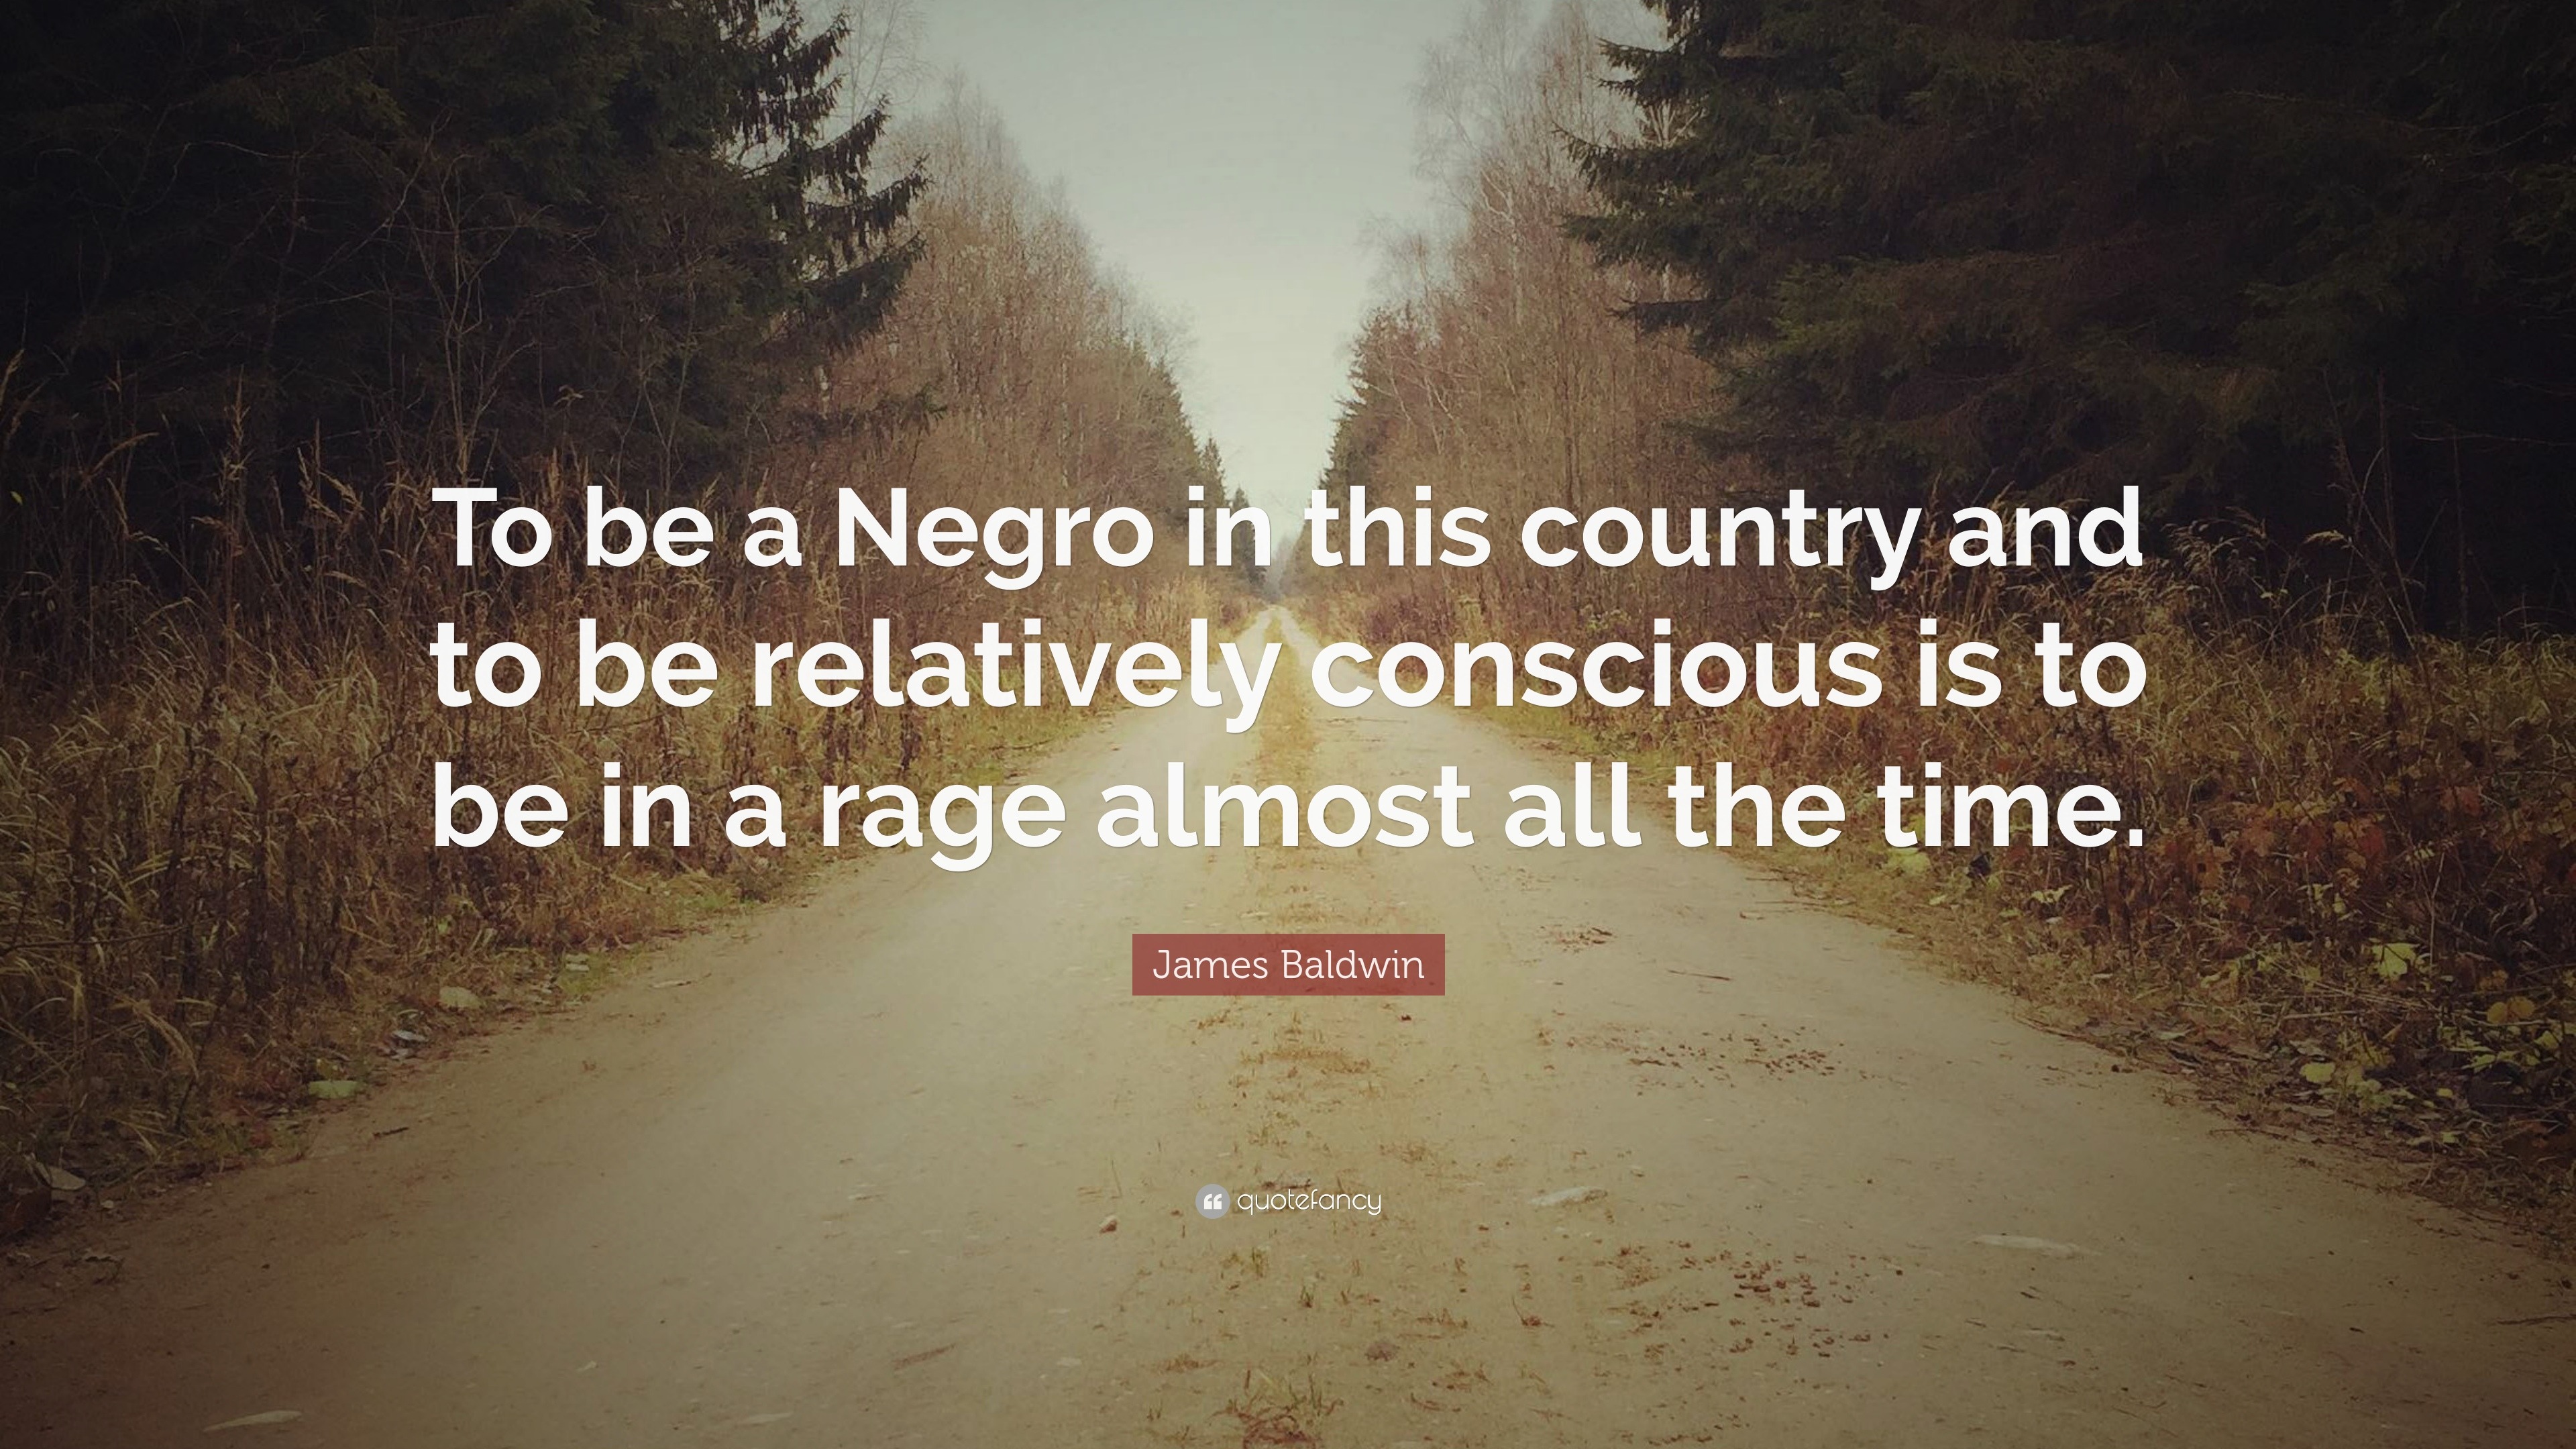 James Baldwin Quote: “To be a Negro in this country and to be ...